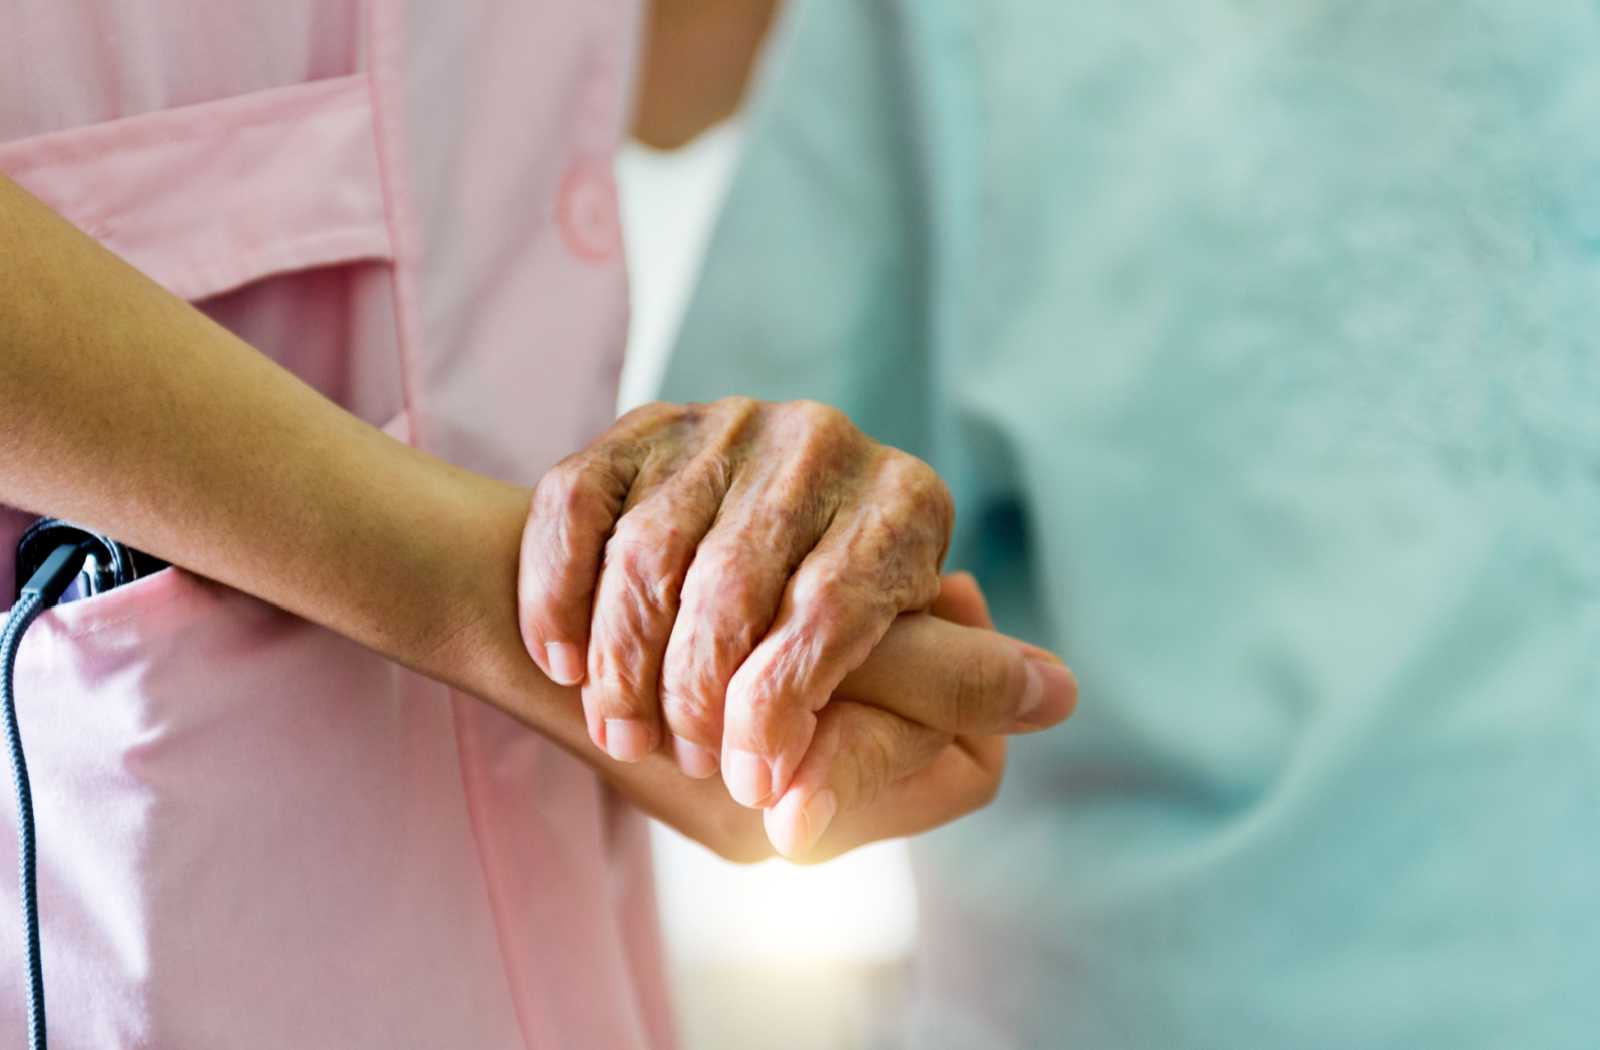 A close-up image of a nurse in pink scrubs holding the hand of a senior resident.